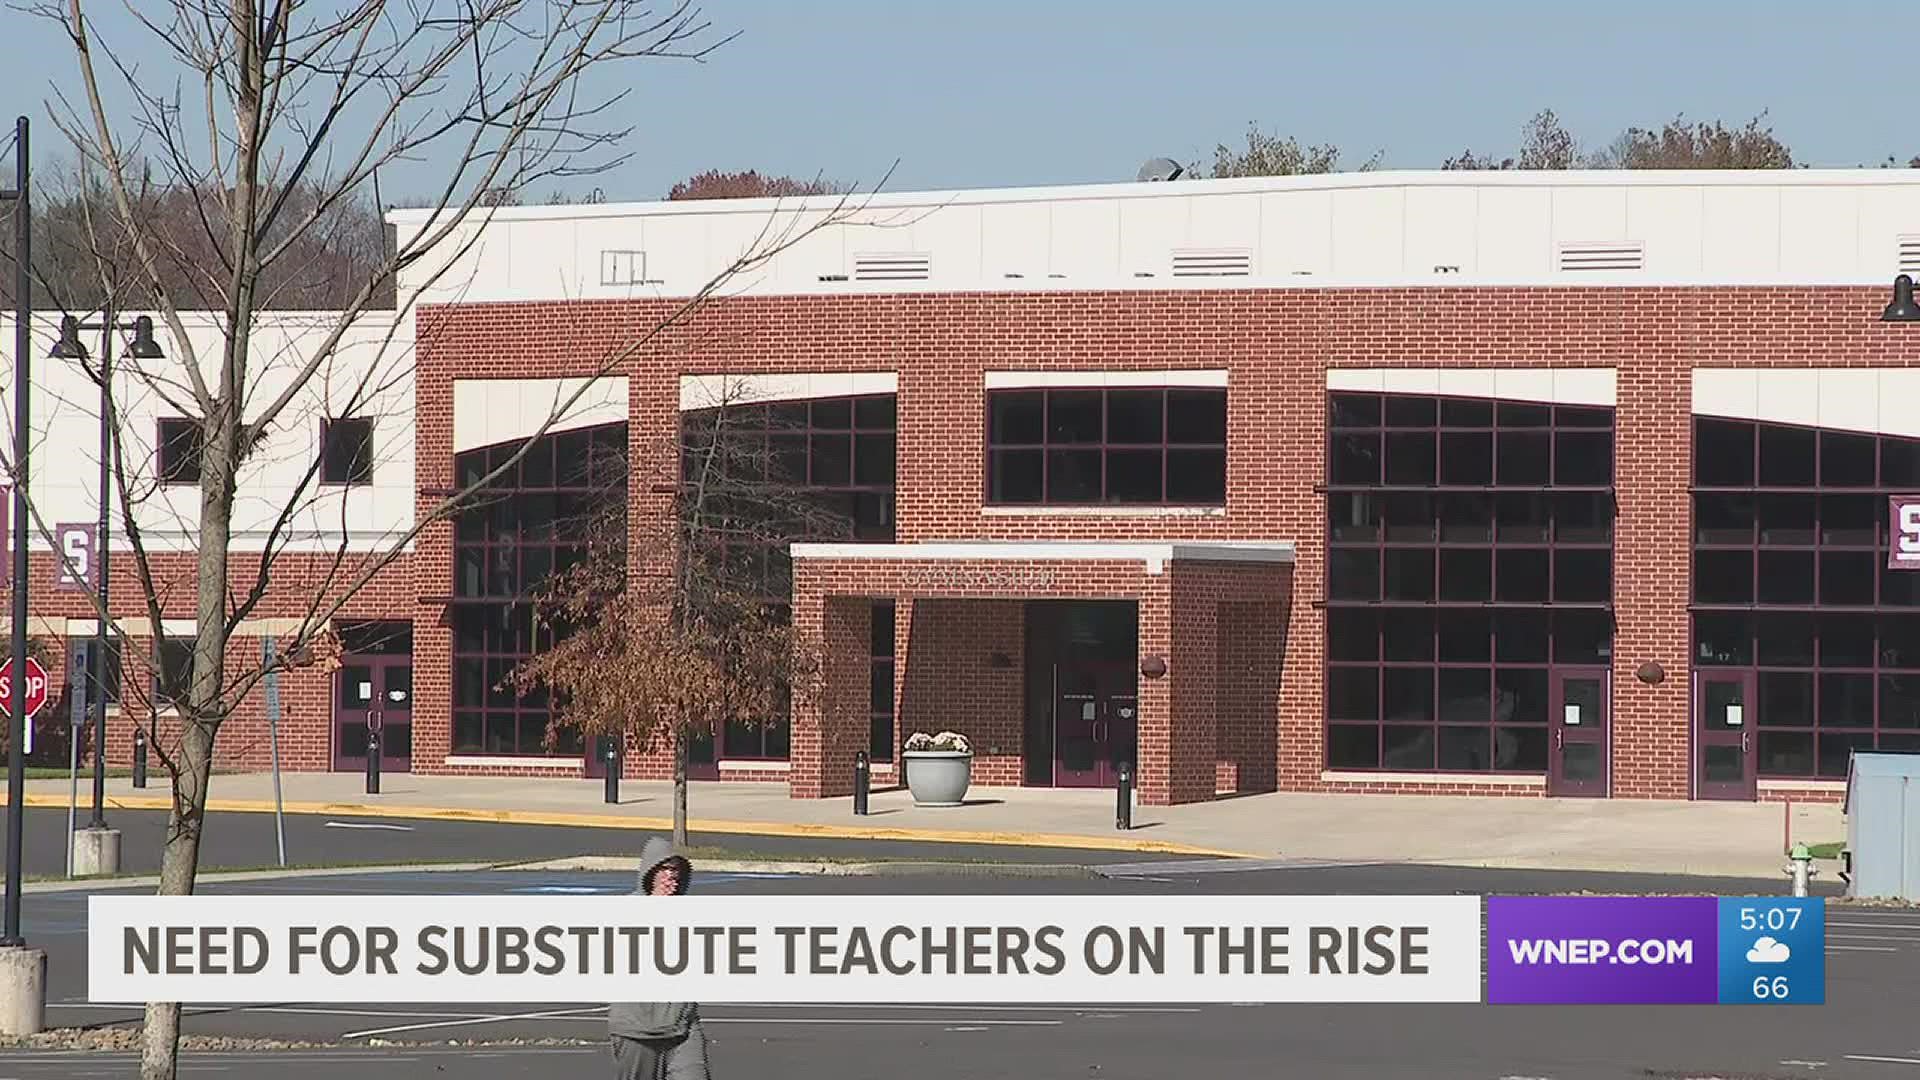 Some school districts are feeling a pinch when it comes to getting enough substitute teachers to cover classes.